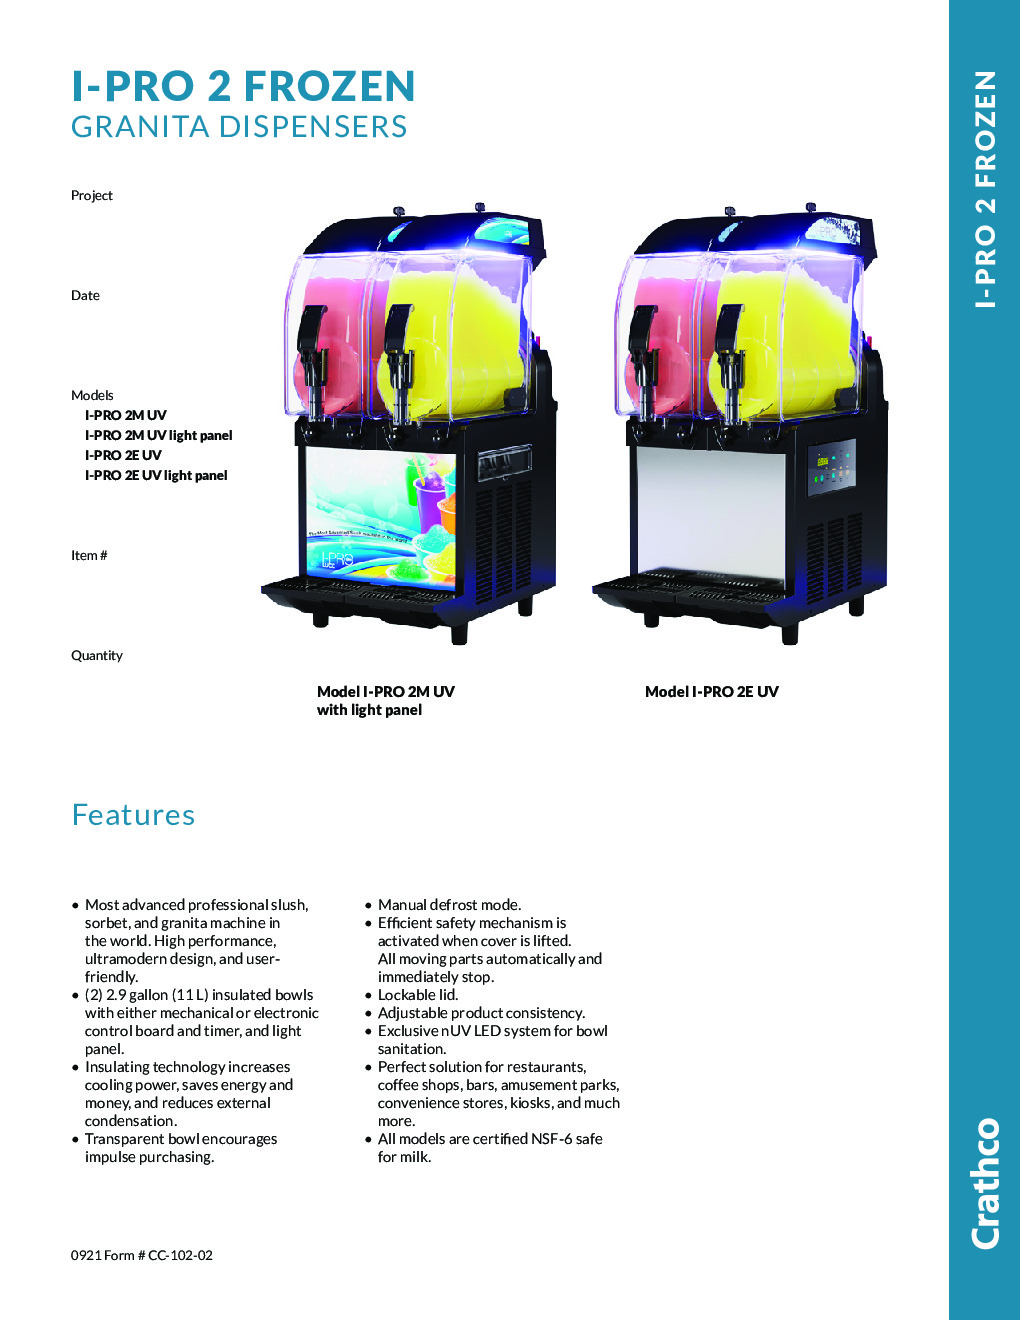 Crathco® I-Pro 2E Frozen Granita Dispenser With Light Panel And Exclusive Nuv Led System For Bowl Sanitation